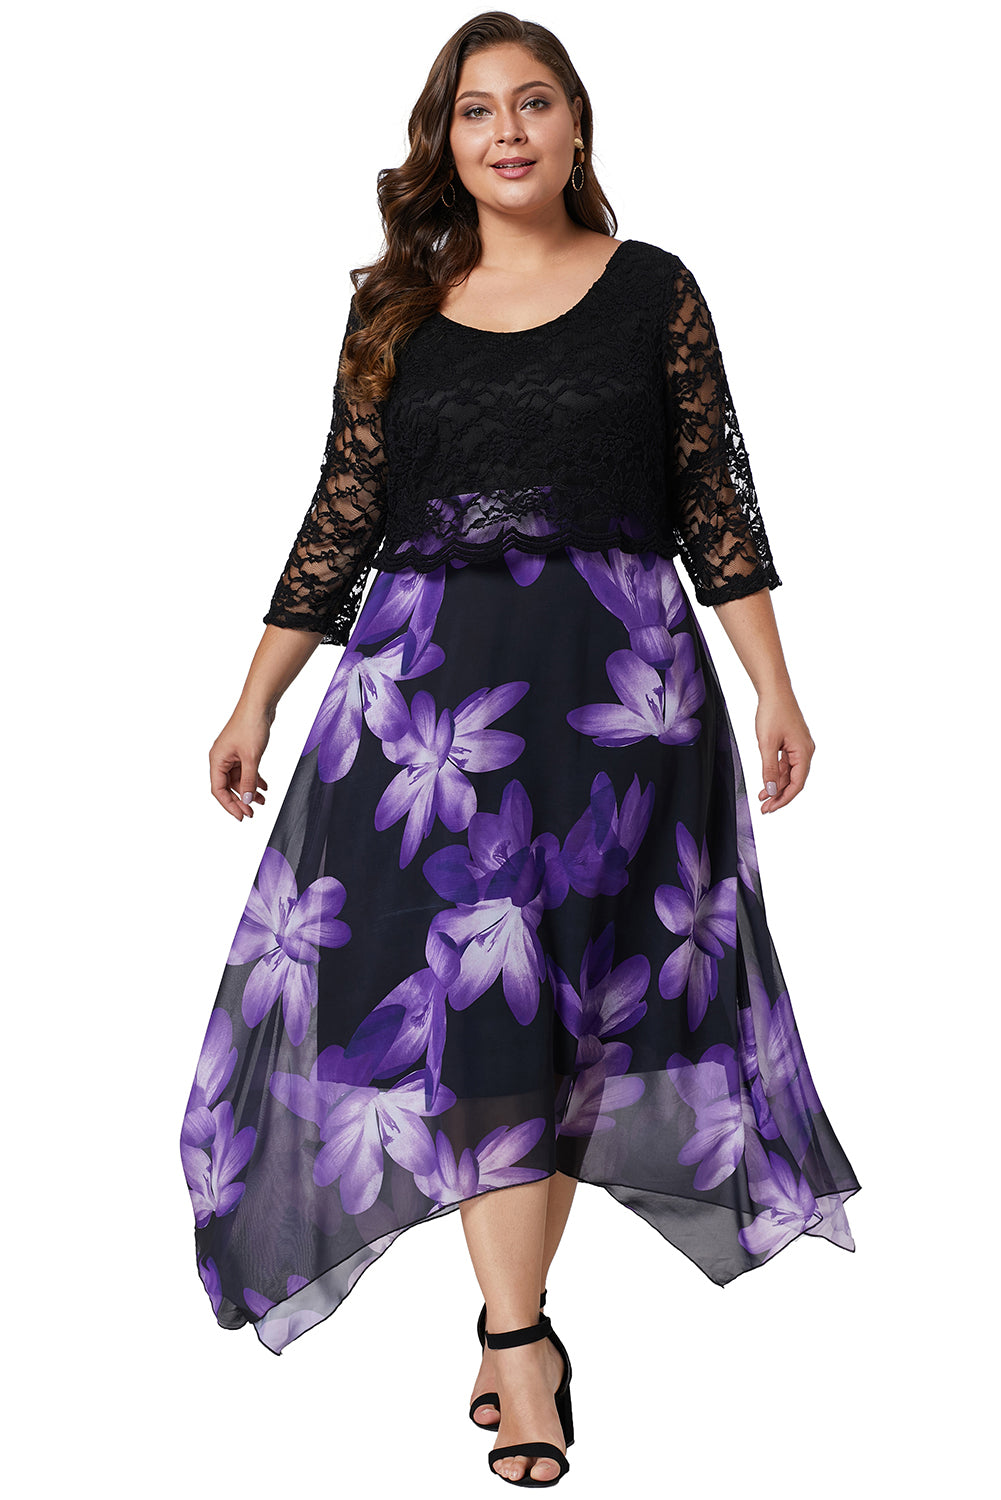 Black Plus Size Floral Dress With Lace Overlay